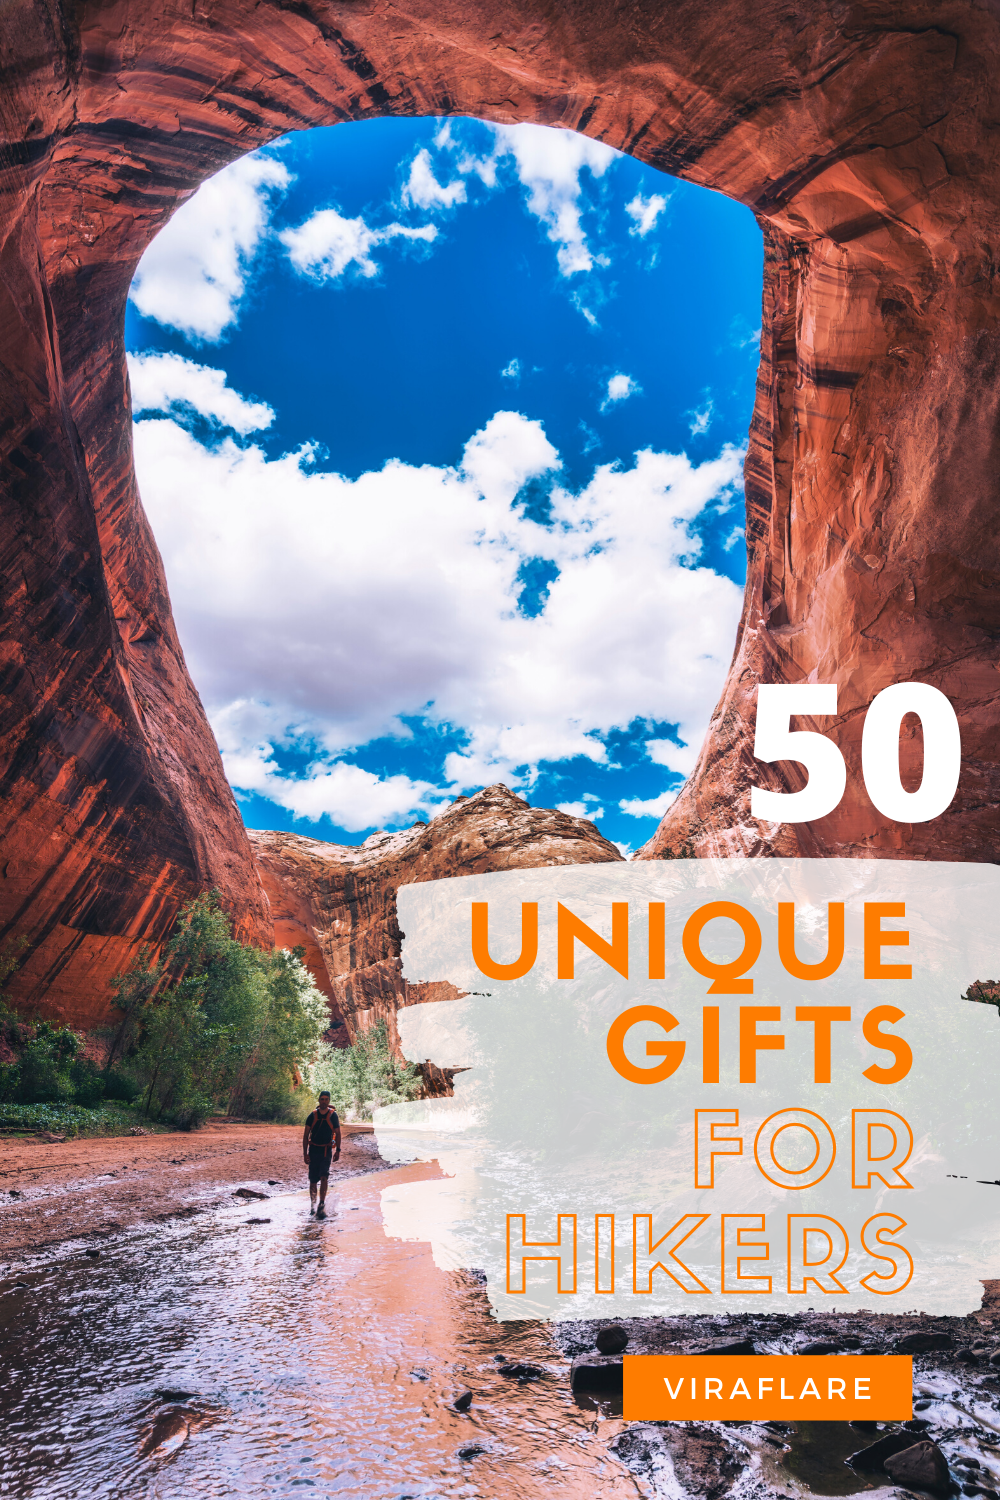 Best hiking gifts